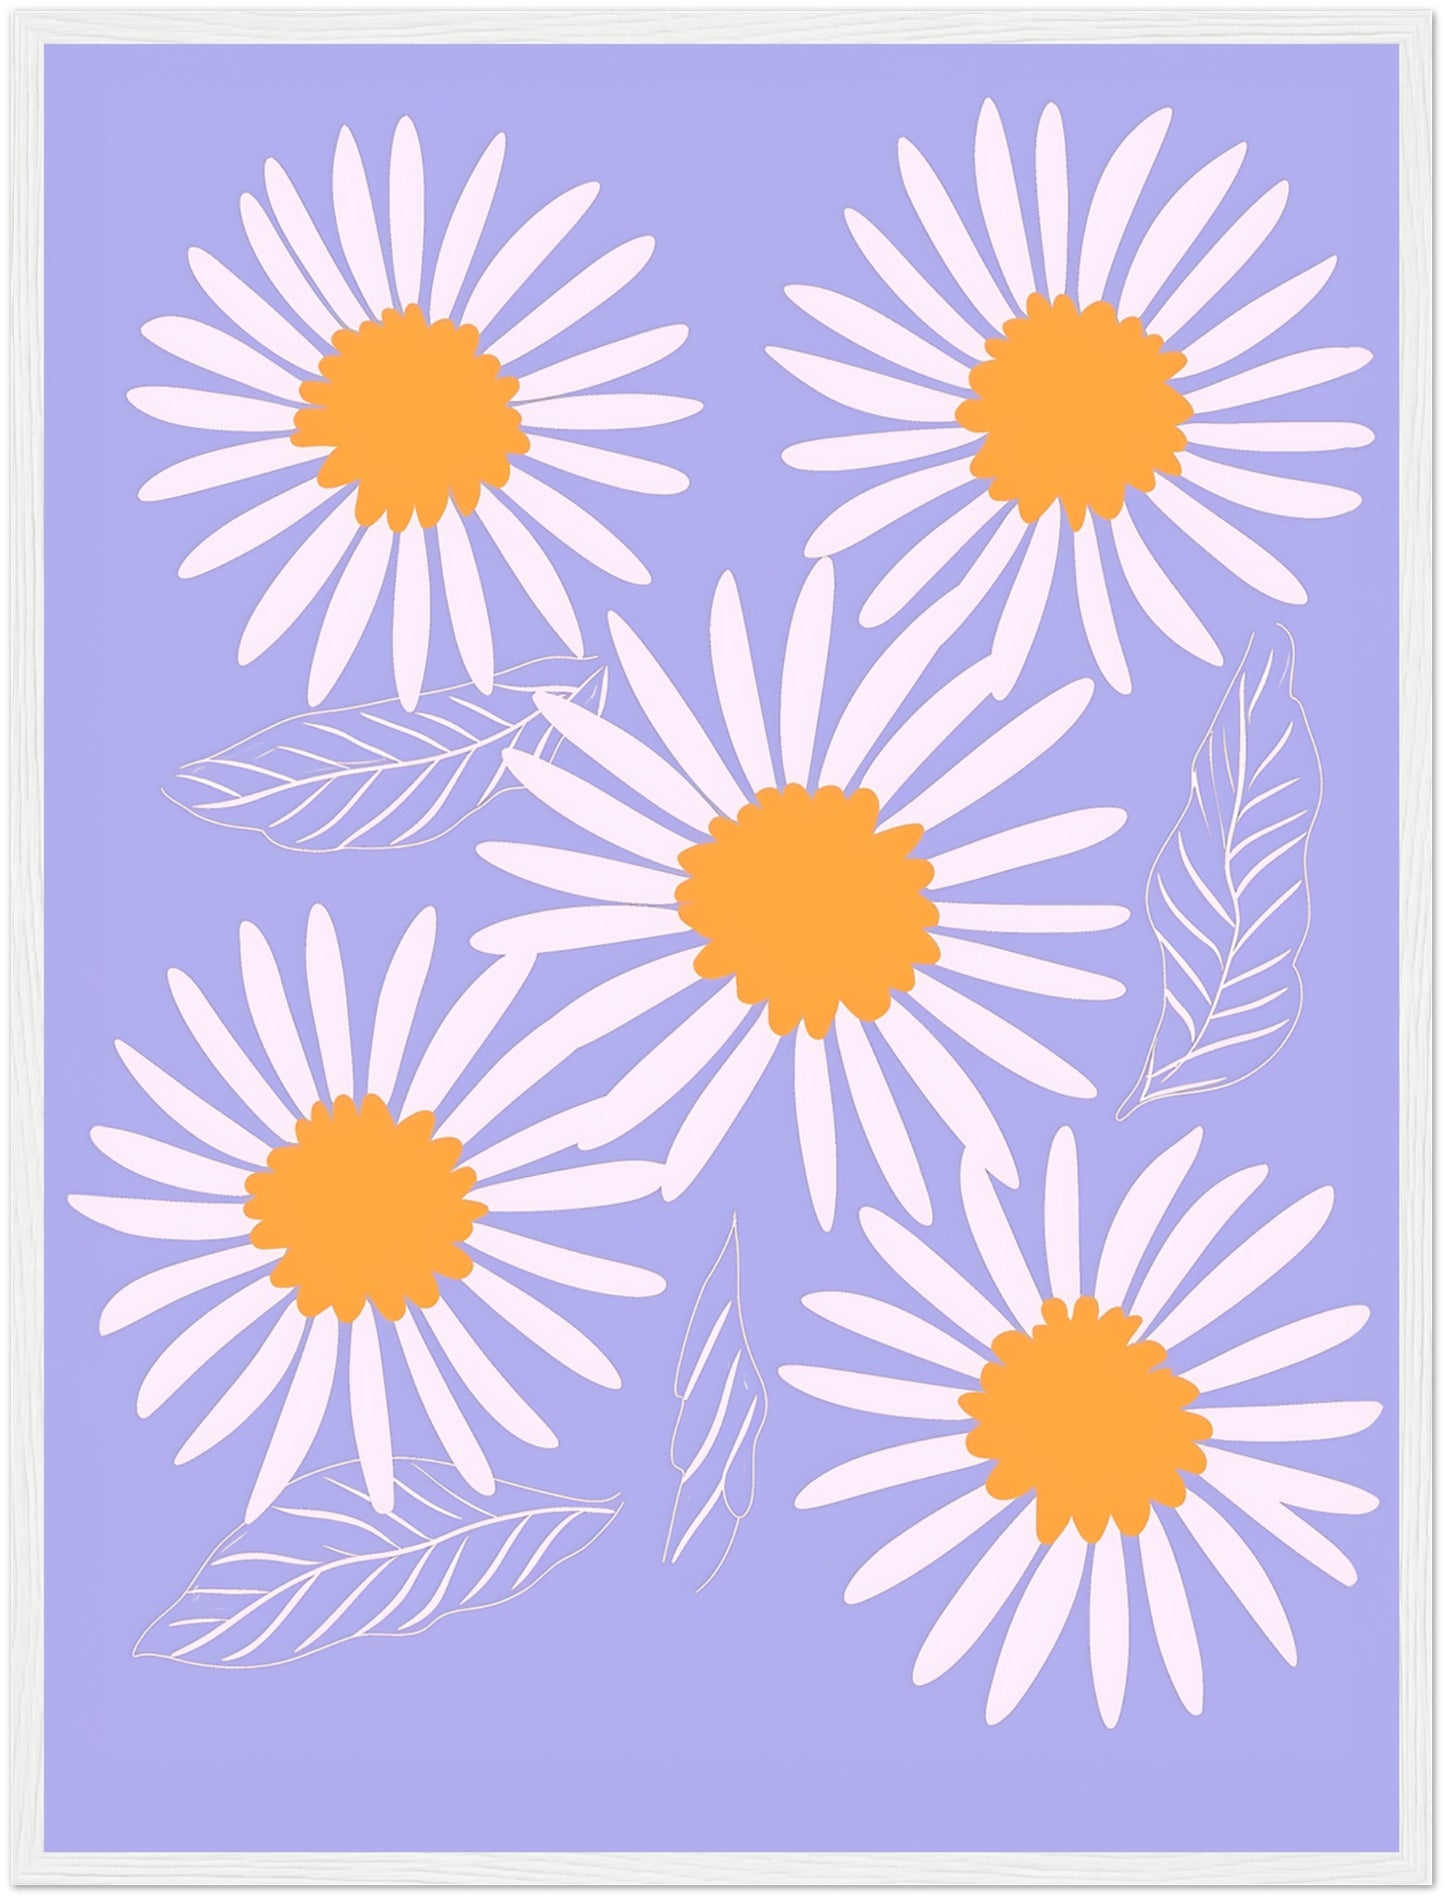 A framed illustration of white daisies with orange centers on a blue background.